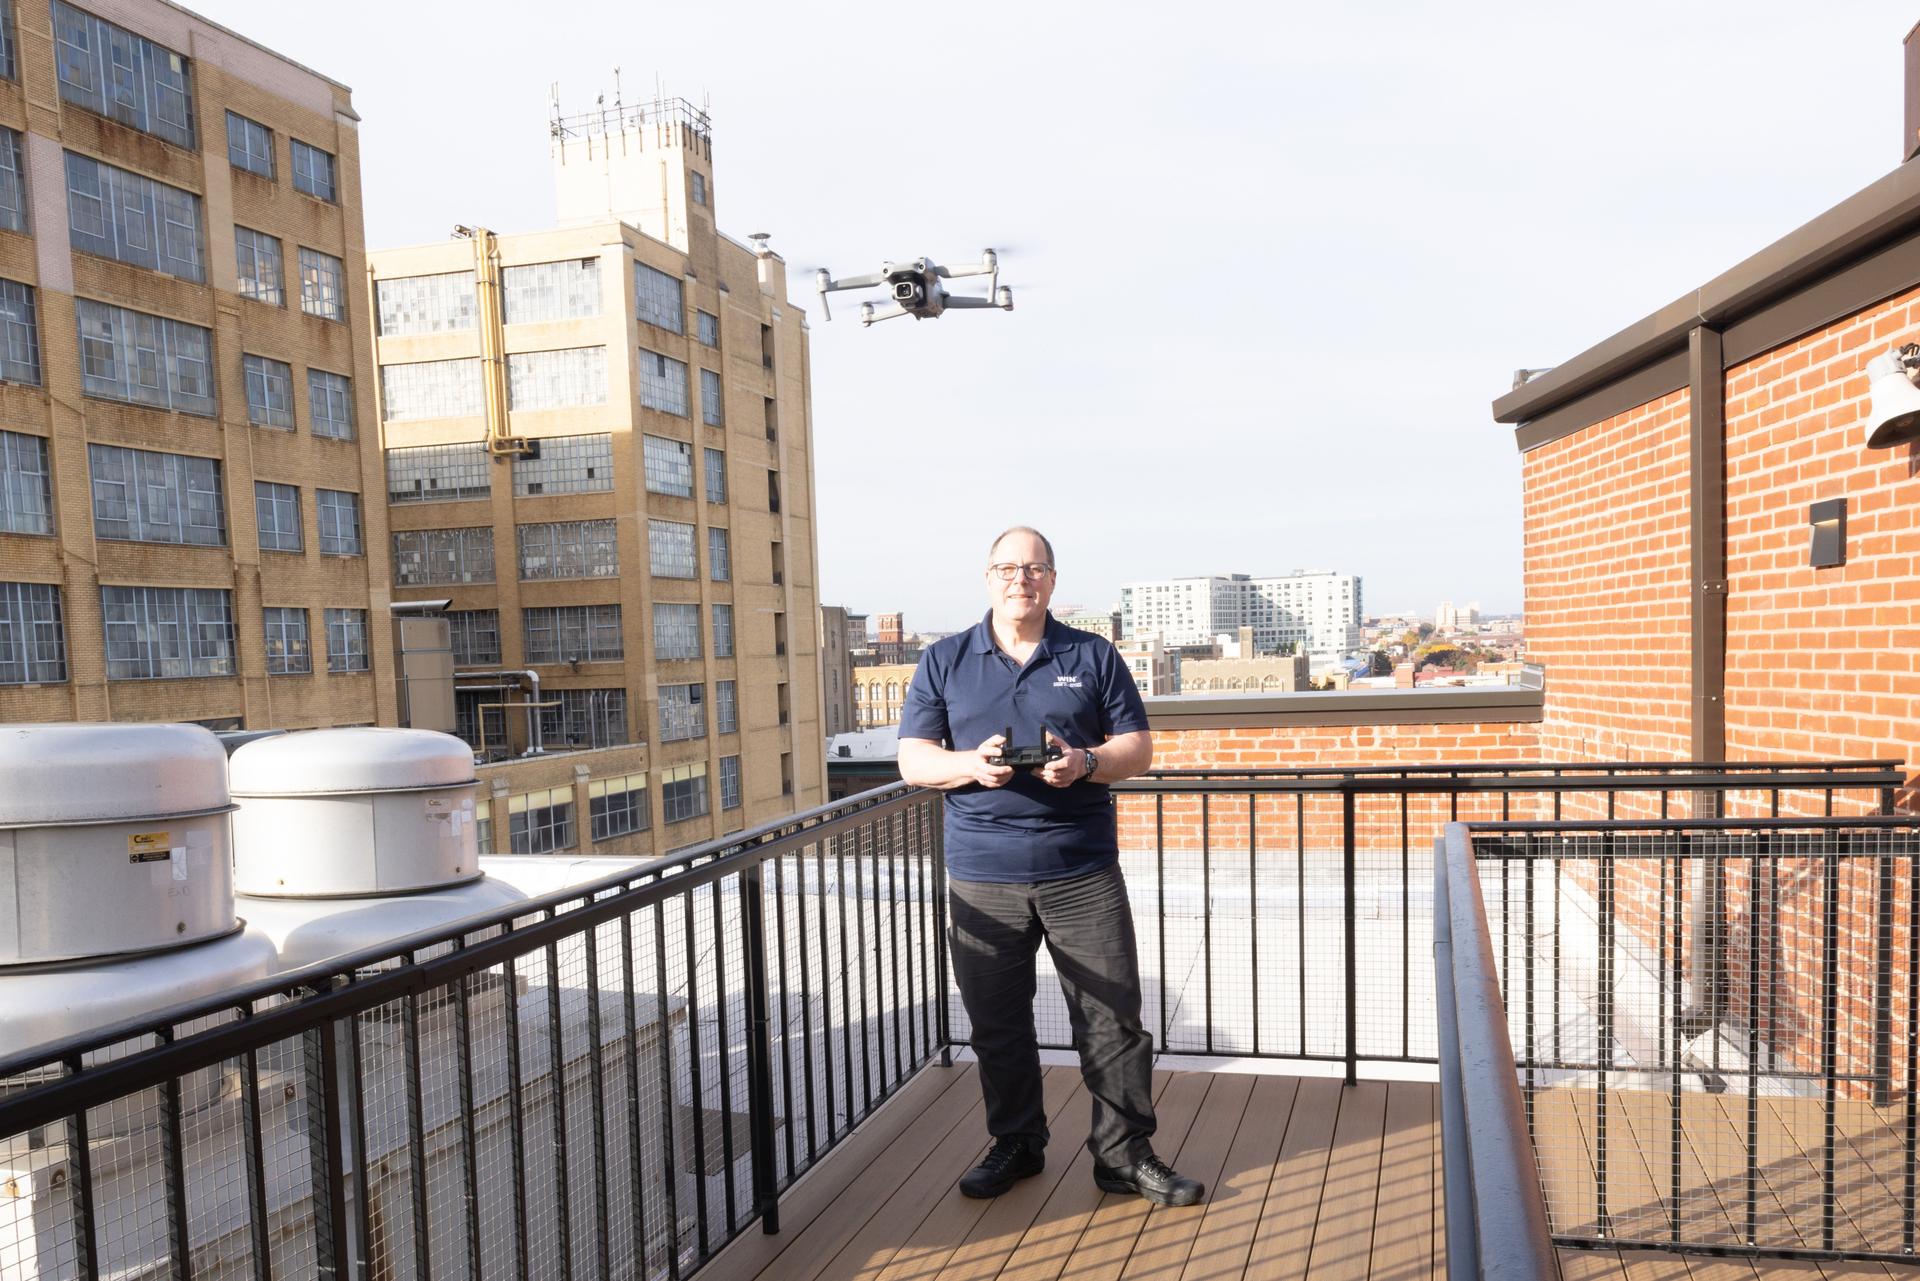 WIN Home Inspector controling a drone on a terrace balcony